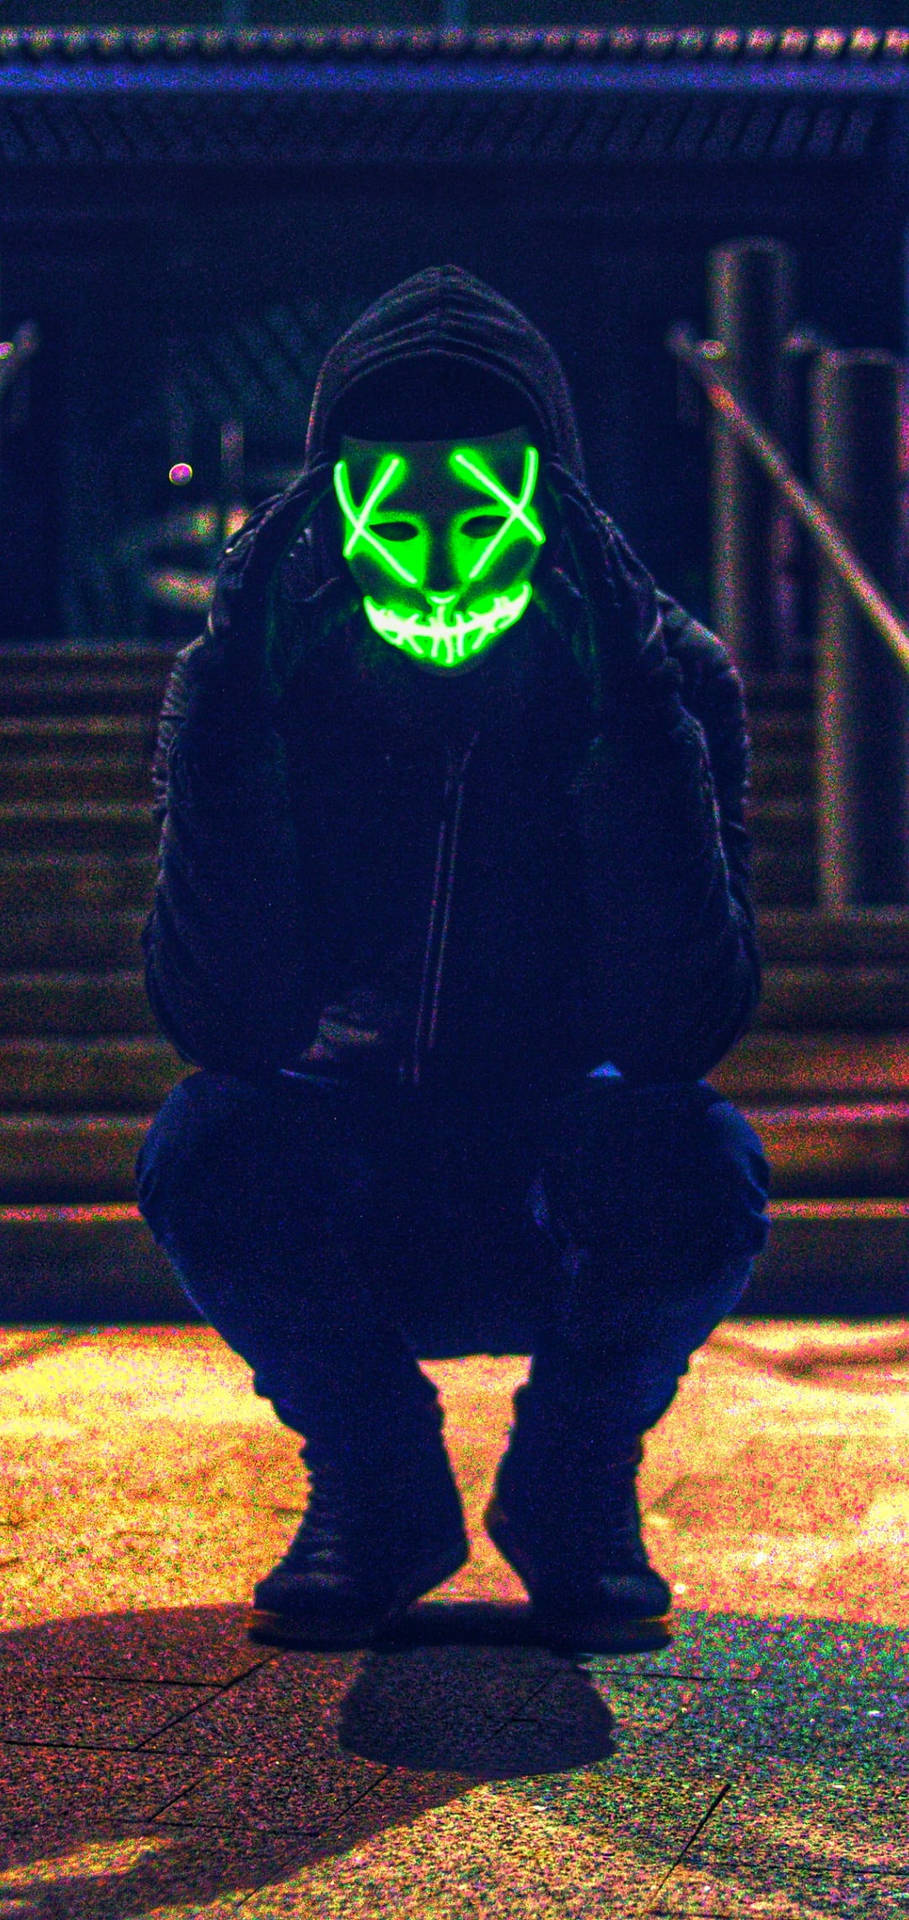 Fear Meets Mystery - A Man In A Chilling Purge Mask Crouched In Darkness Background